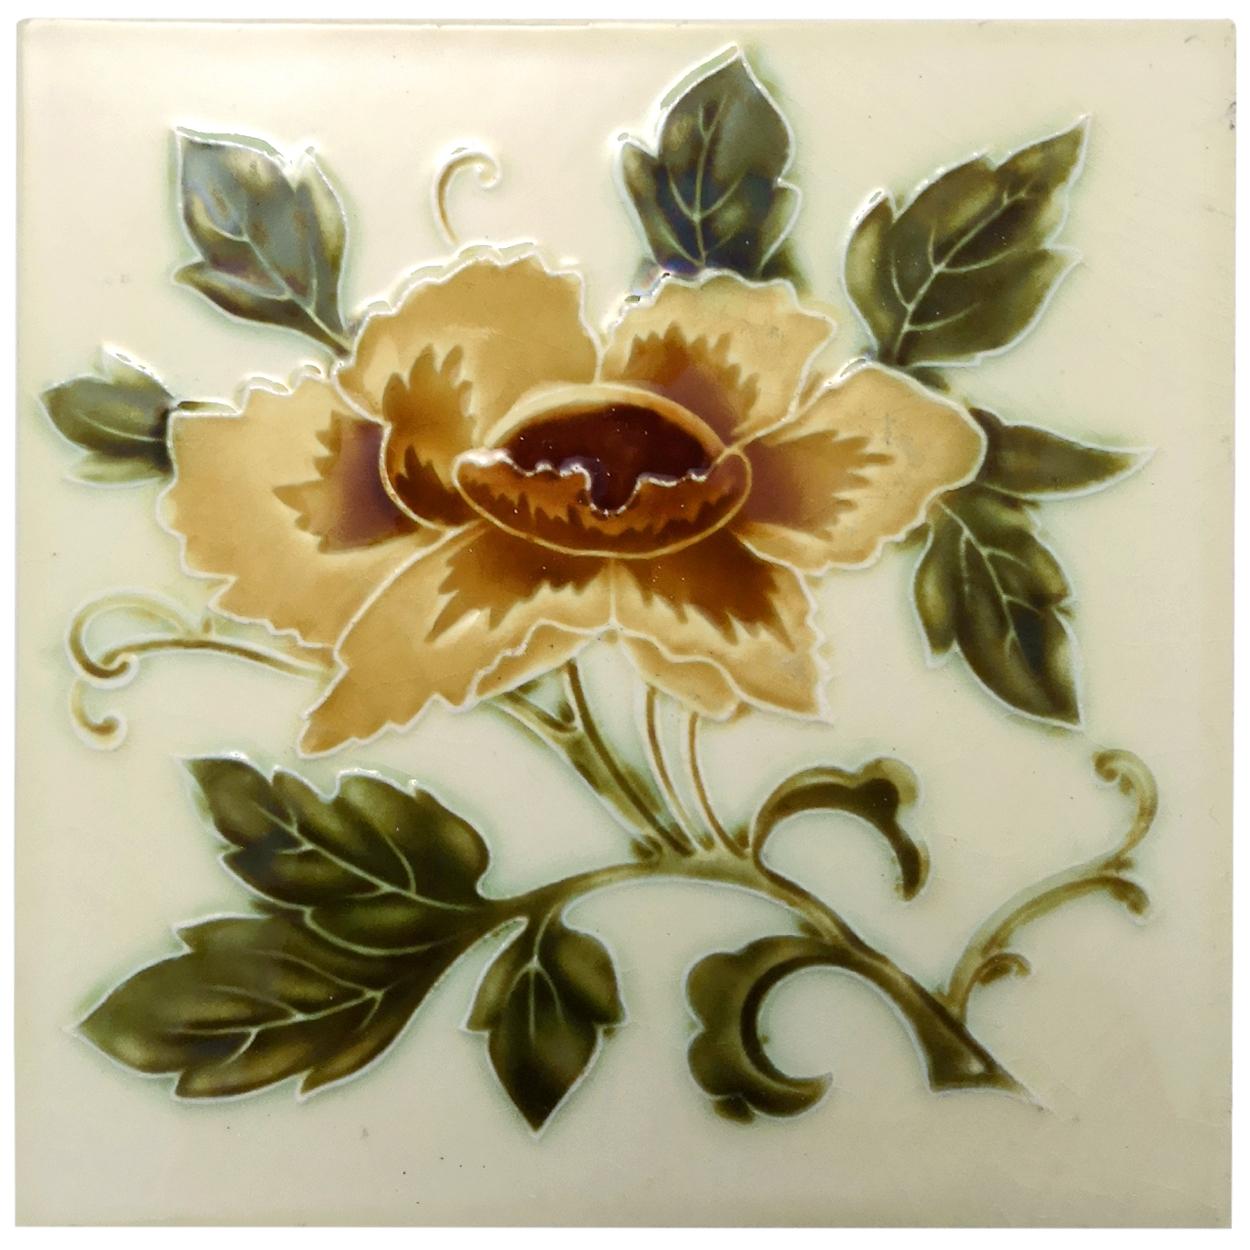 This is an amazing set of antique Art Nouveau handmade tiles with an image of yellow rose in relief on a soft yellow background. These tiles would be charming displayed on easels, framed or incorporated into a custom tile design.

Please note that